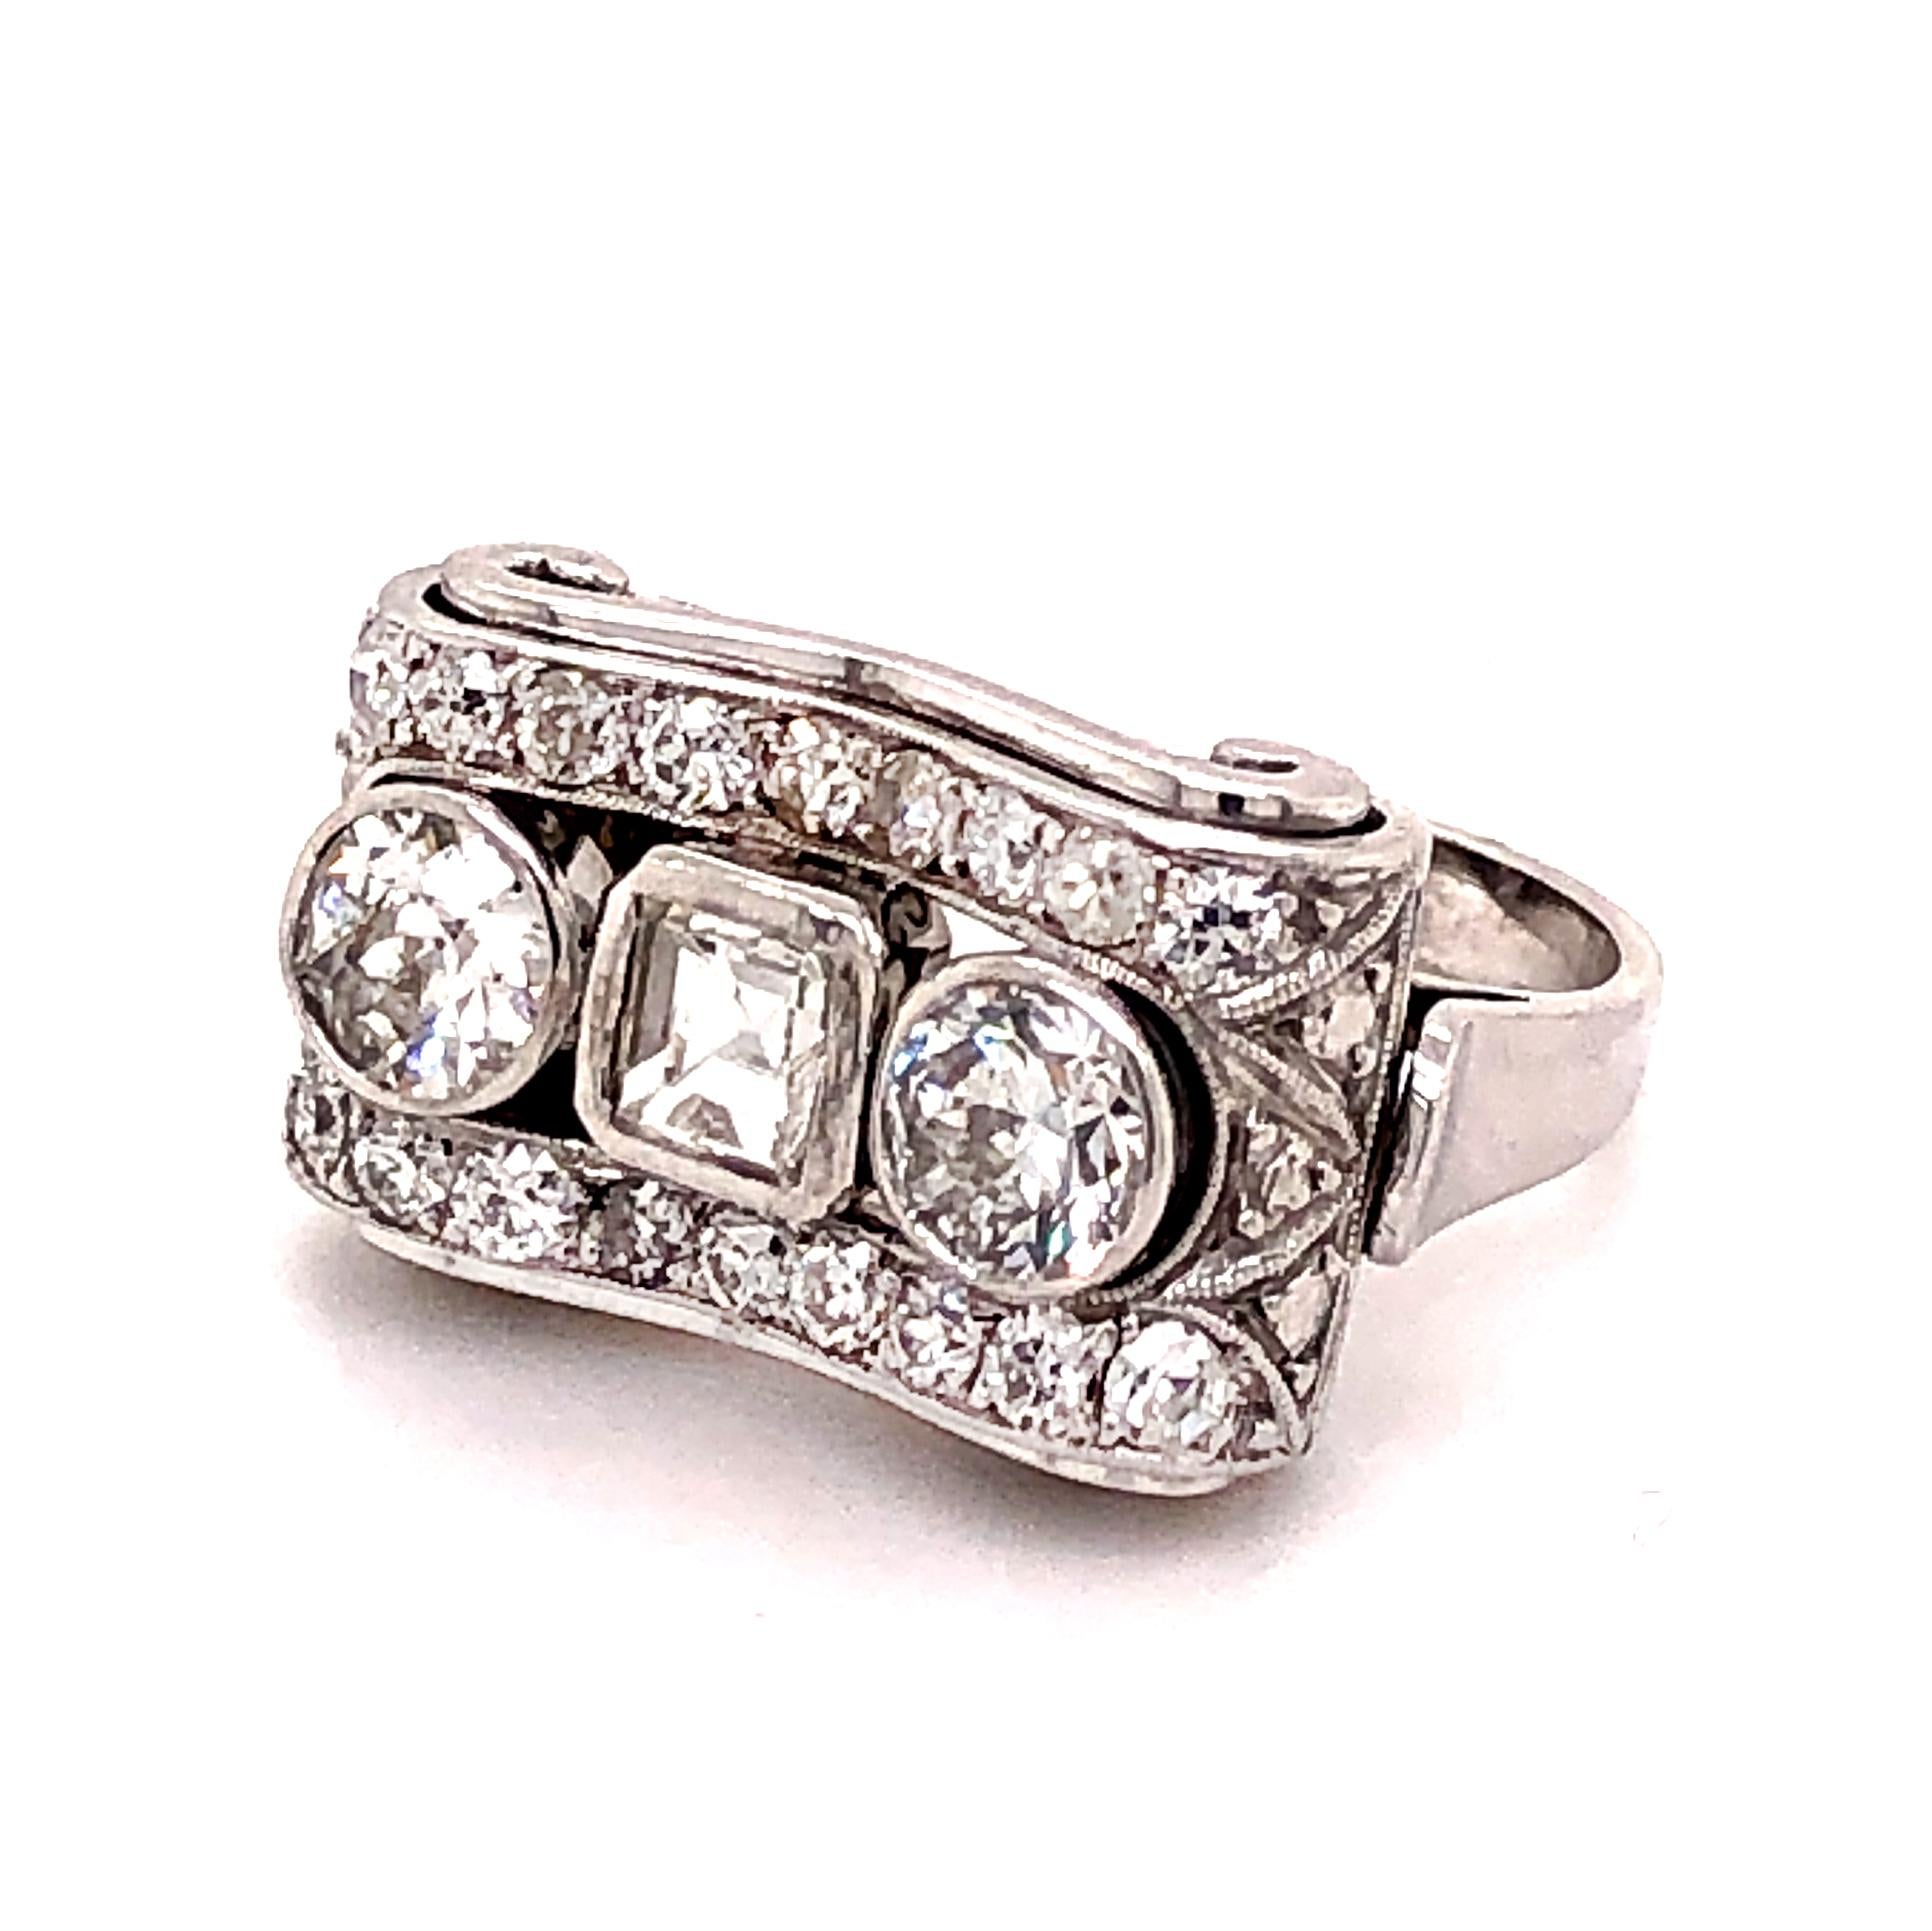 A lovely diamond ring from the 1950s, which can be worn everyday. It is centred with two round brilliant cut and one square cut diamond in the middle and accentuated with smaller round brilliant cut diamonds at the top and bottom - the total diamond